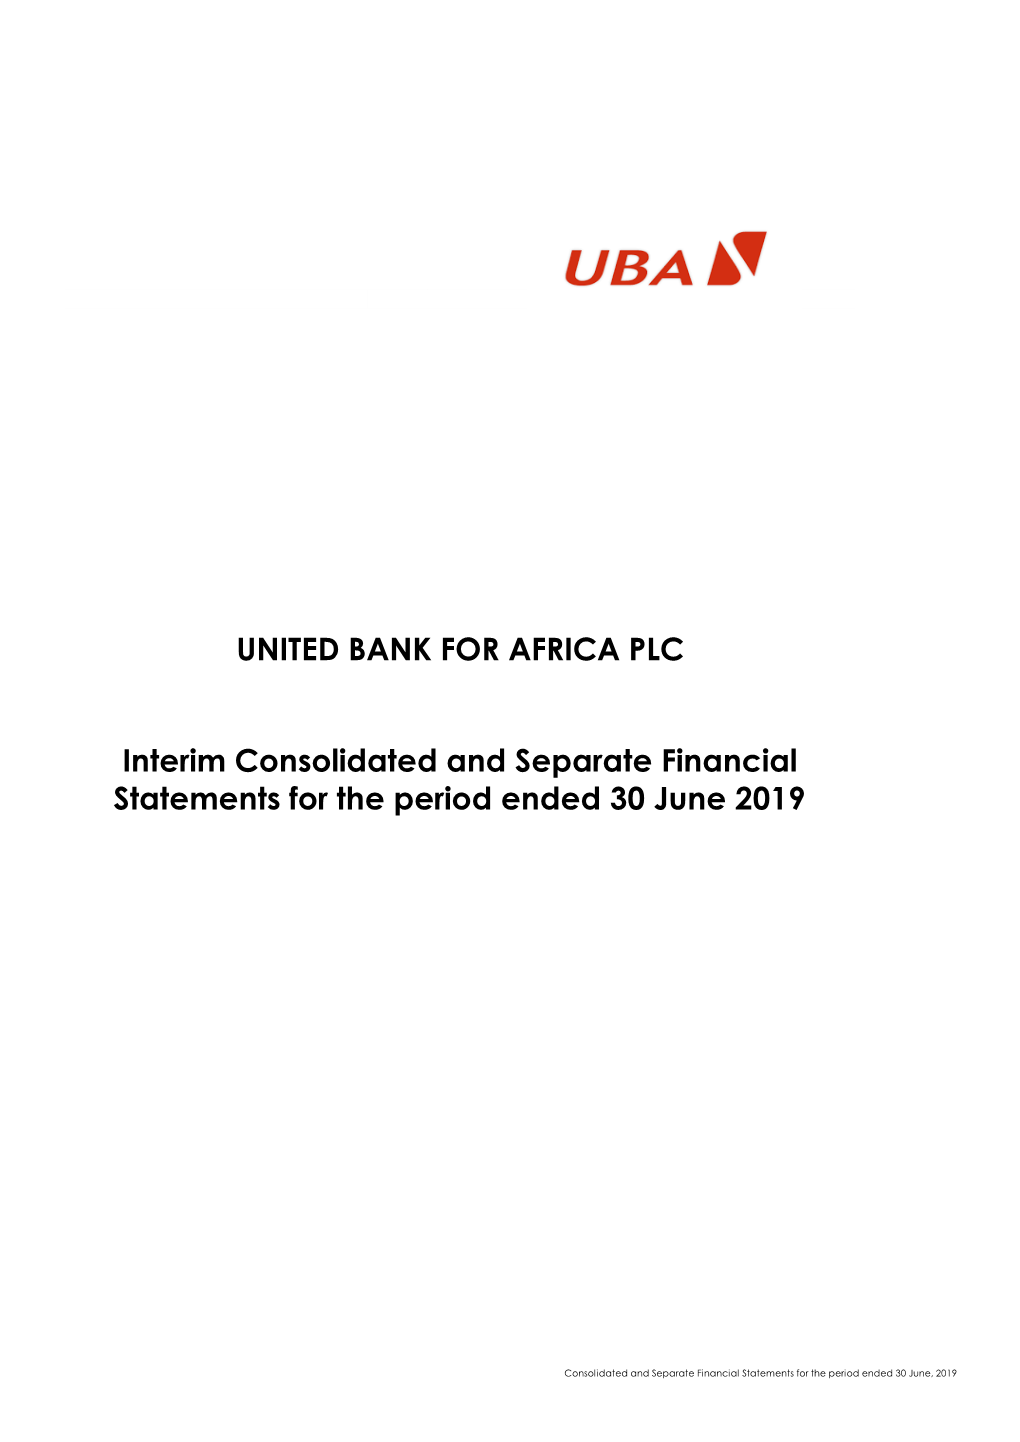 UNITED BANK for AFRICA PLC Interim Consolidated and Separate